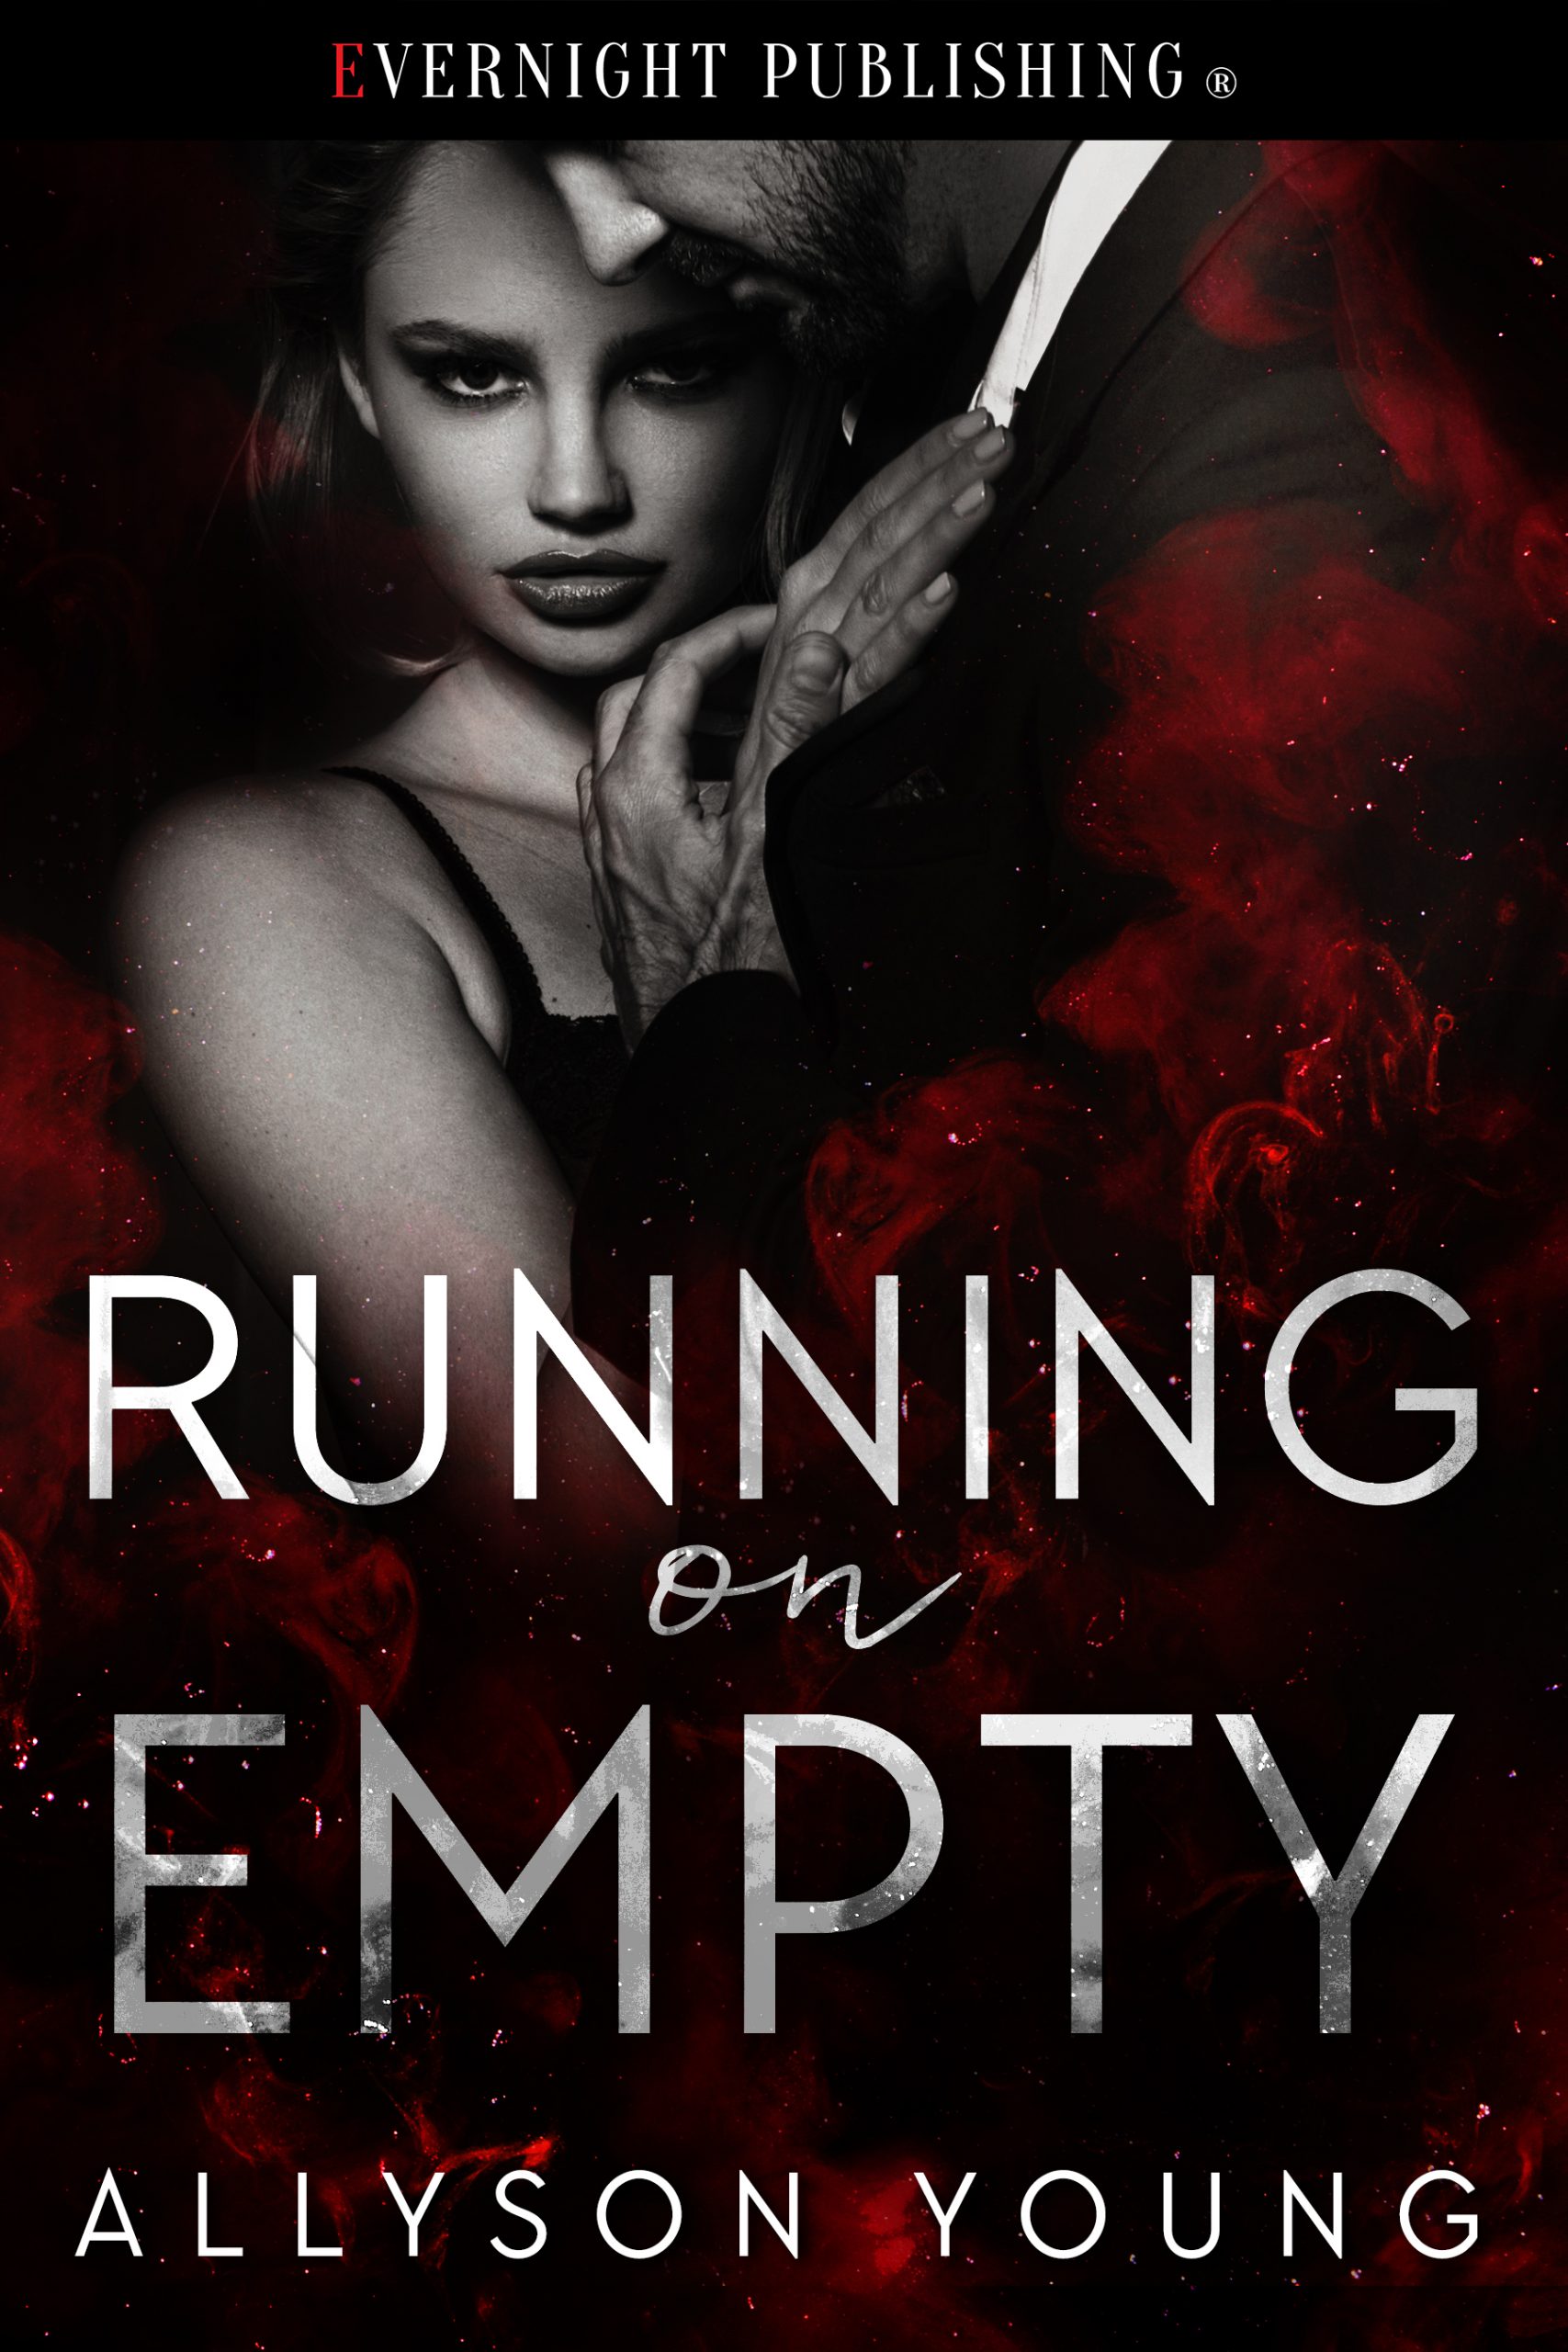 Running on Empty by Allyson Young